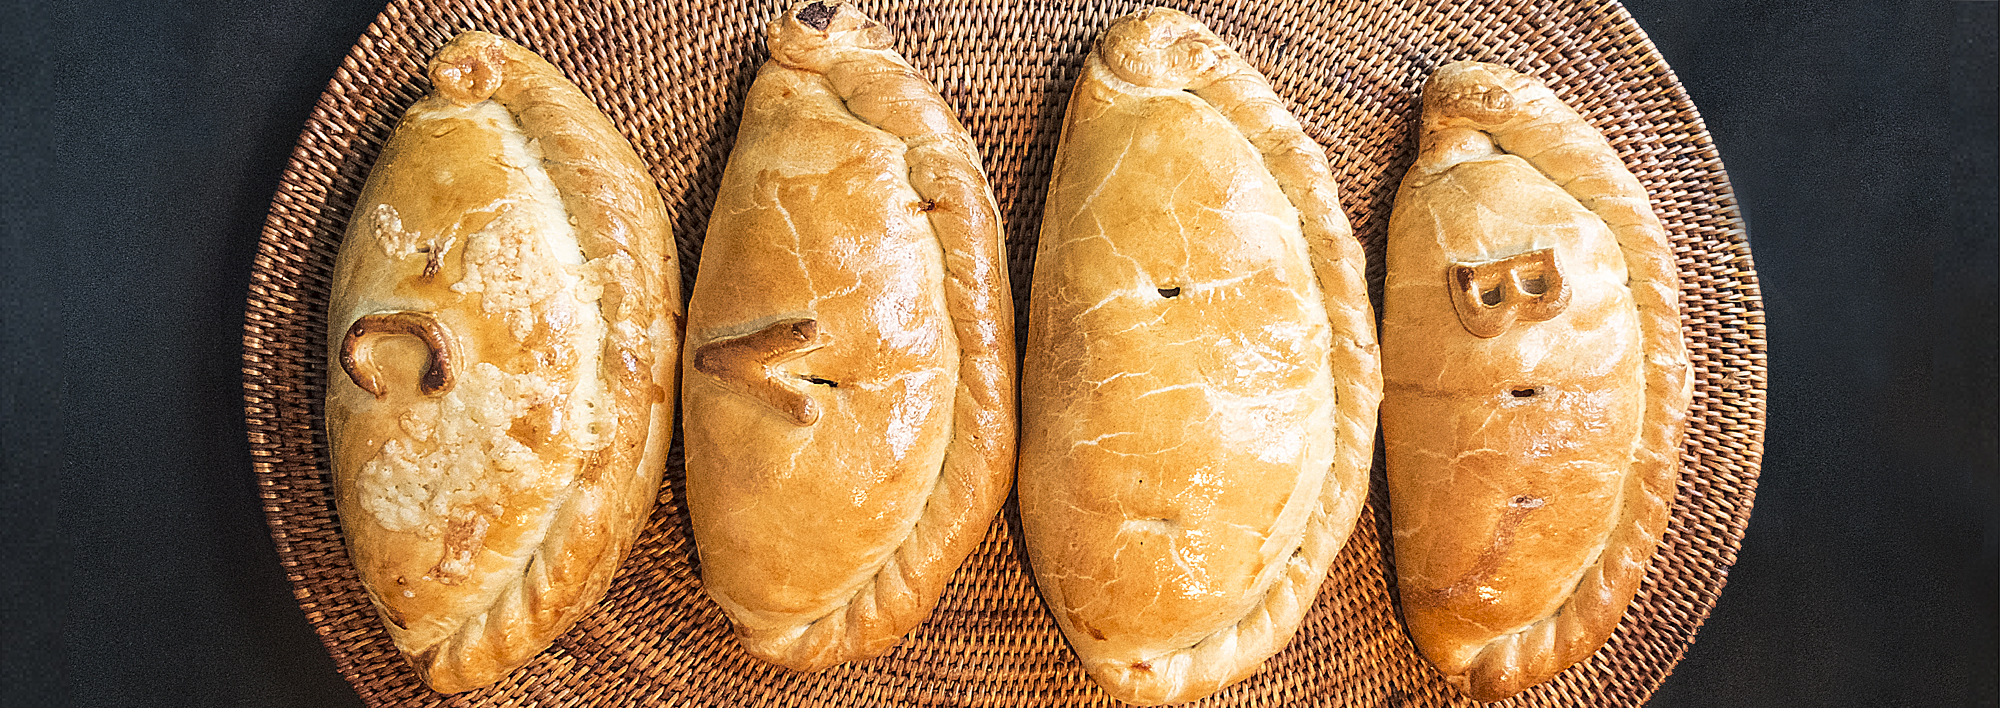 West country pasties